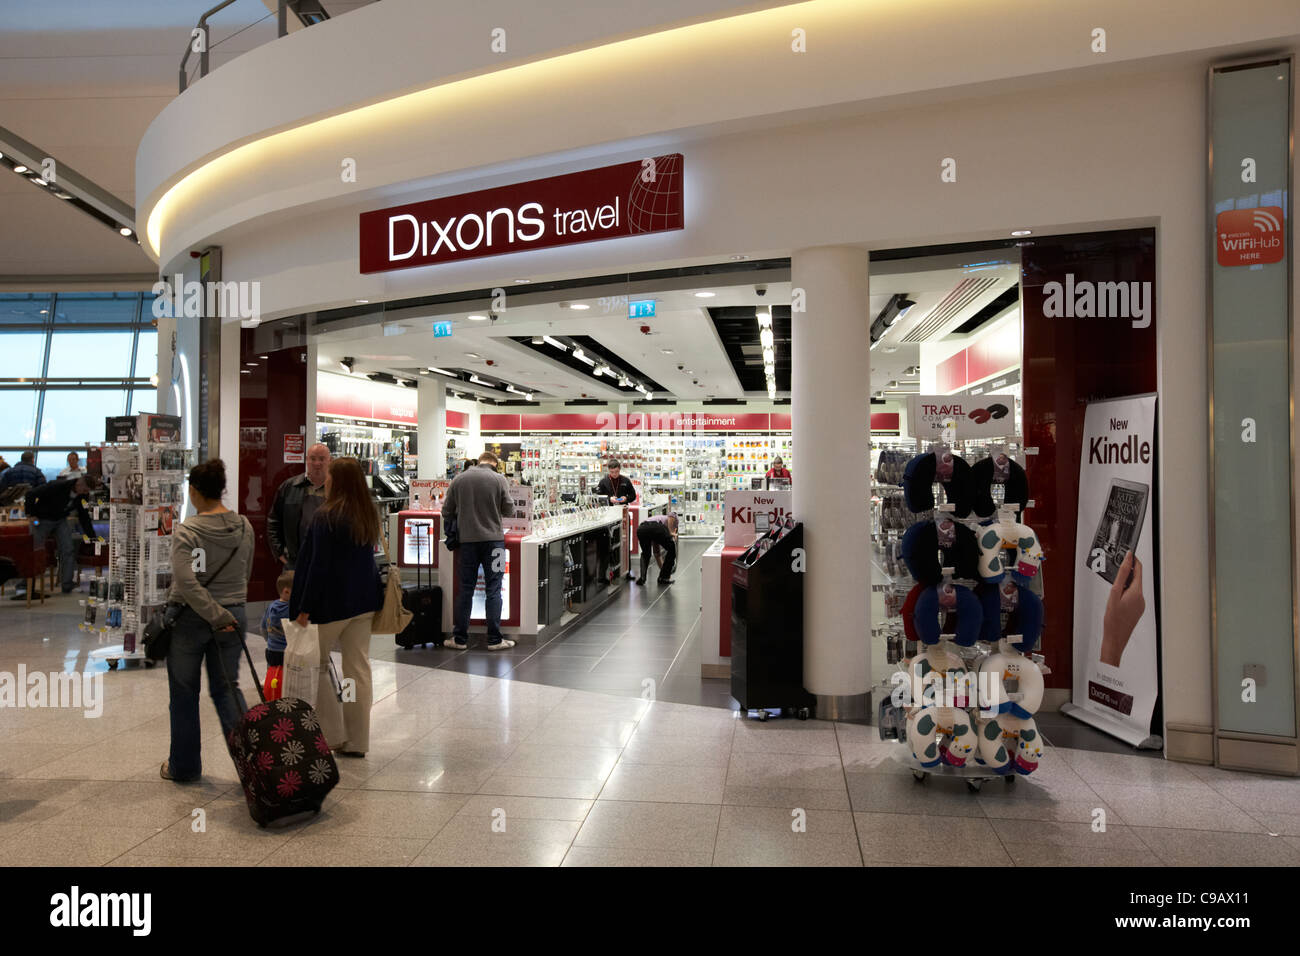 dixons travel store in the departures area of terminal 2 dublin international airport republic of ireland Stock Photo